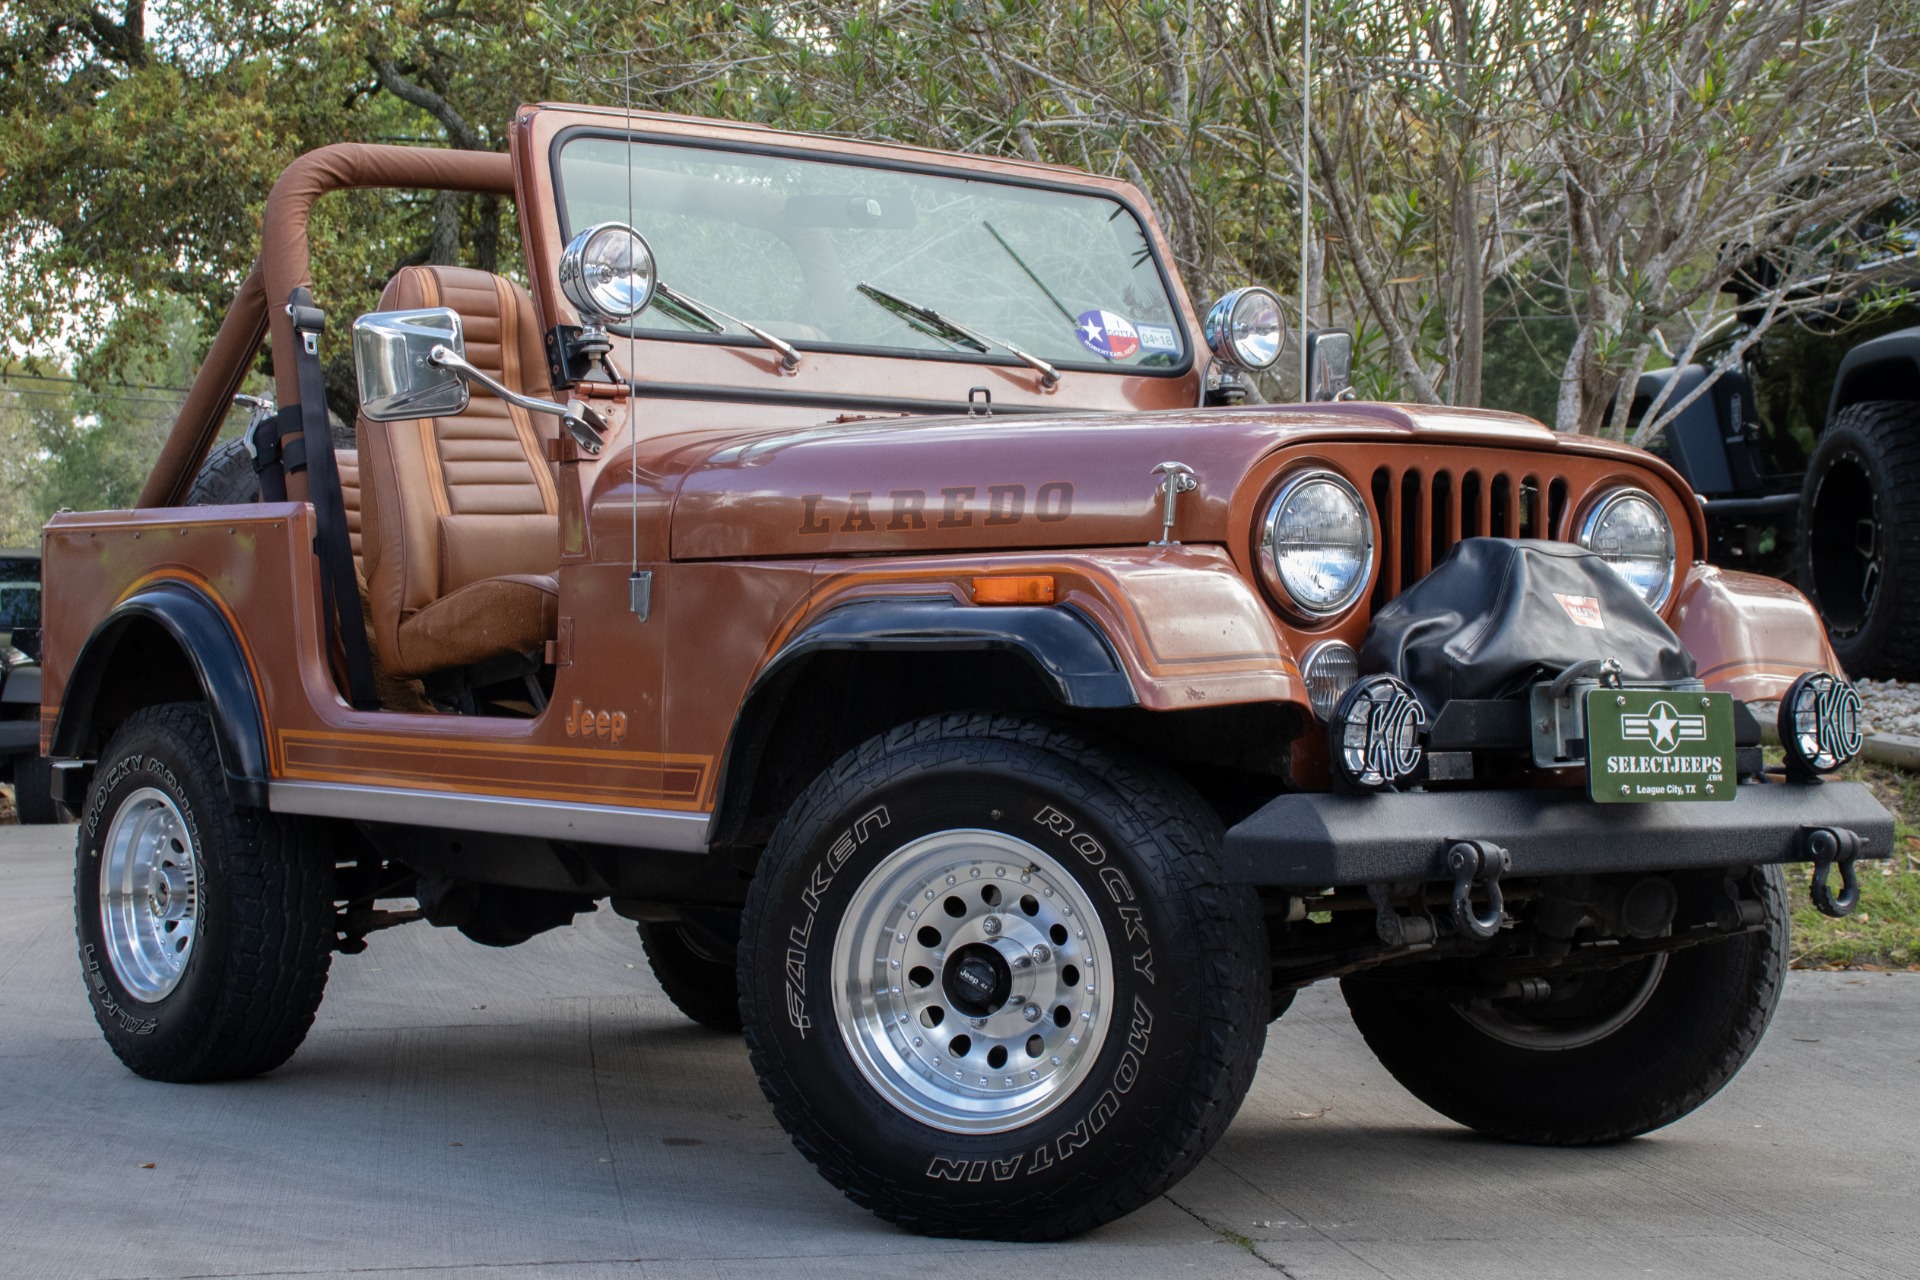 Used 1981 Jeep CJ-7 For Sale ($25,995) | Select Jeeps Inc. Stock #077839